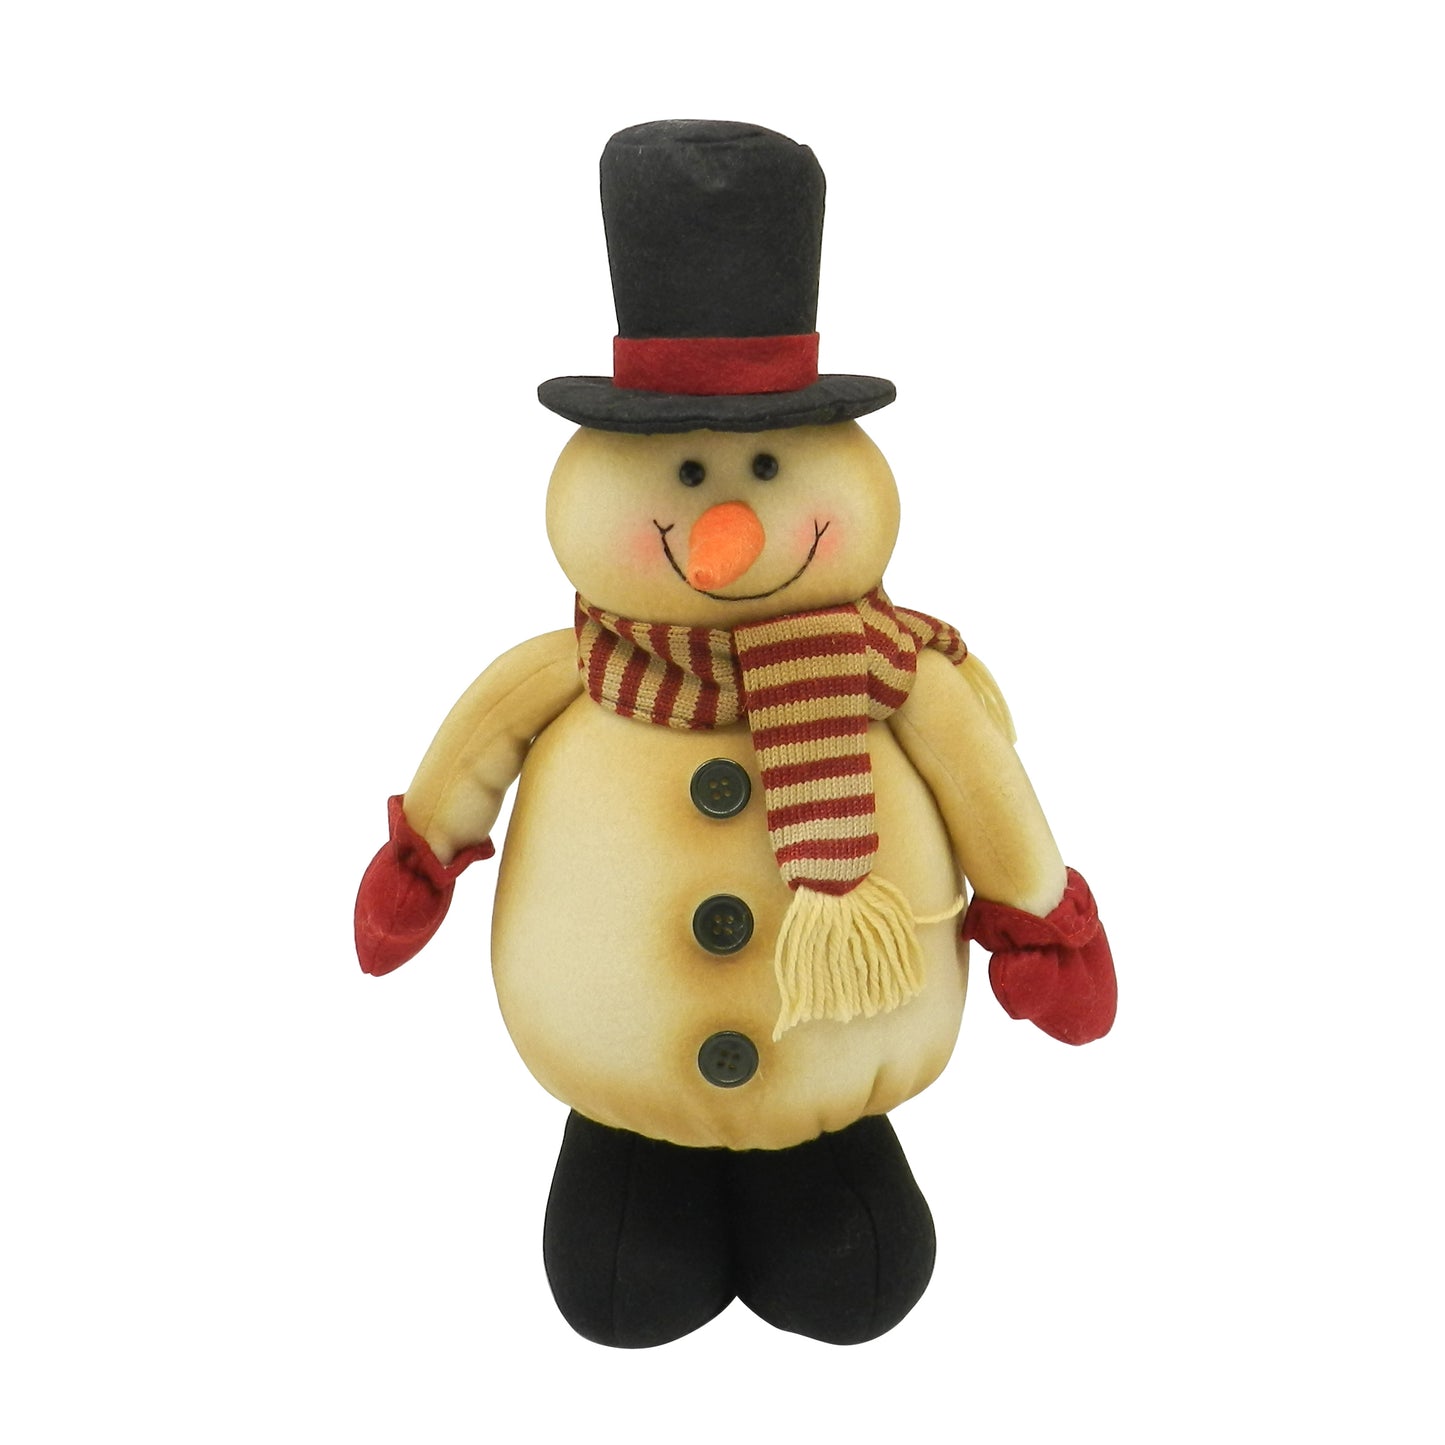 CVHOMEDECO. Country Rustic Standing Plush Snowman Doll with Black Boots and Top Hat Vintage Stuffed Toy Christmas Decoration, 16 Inch